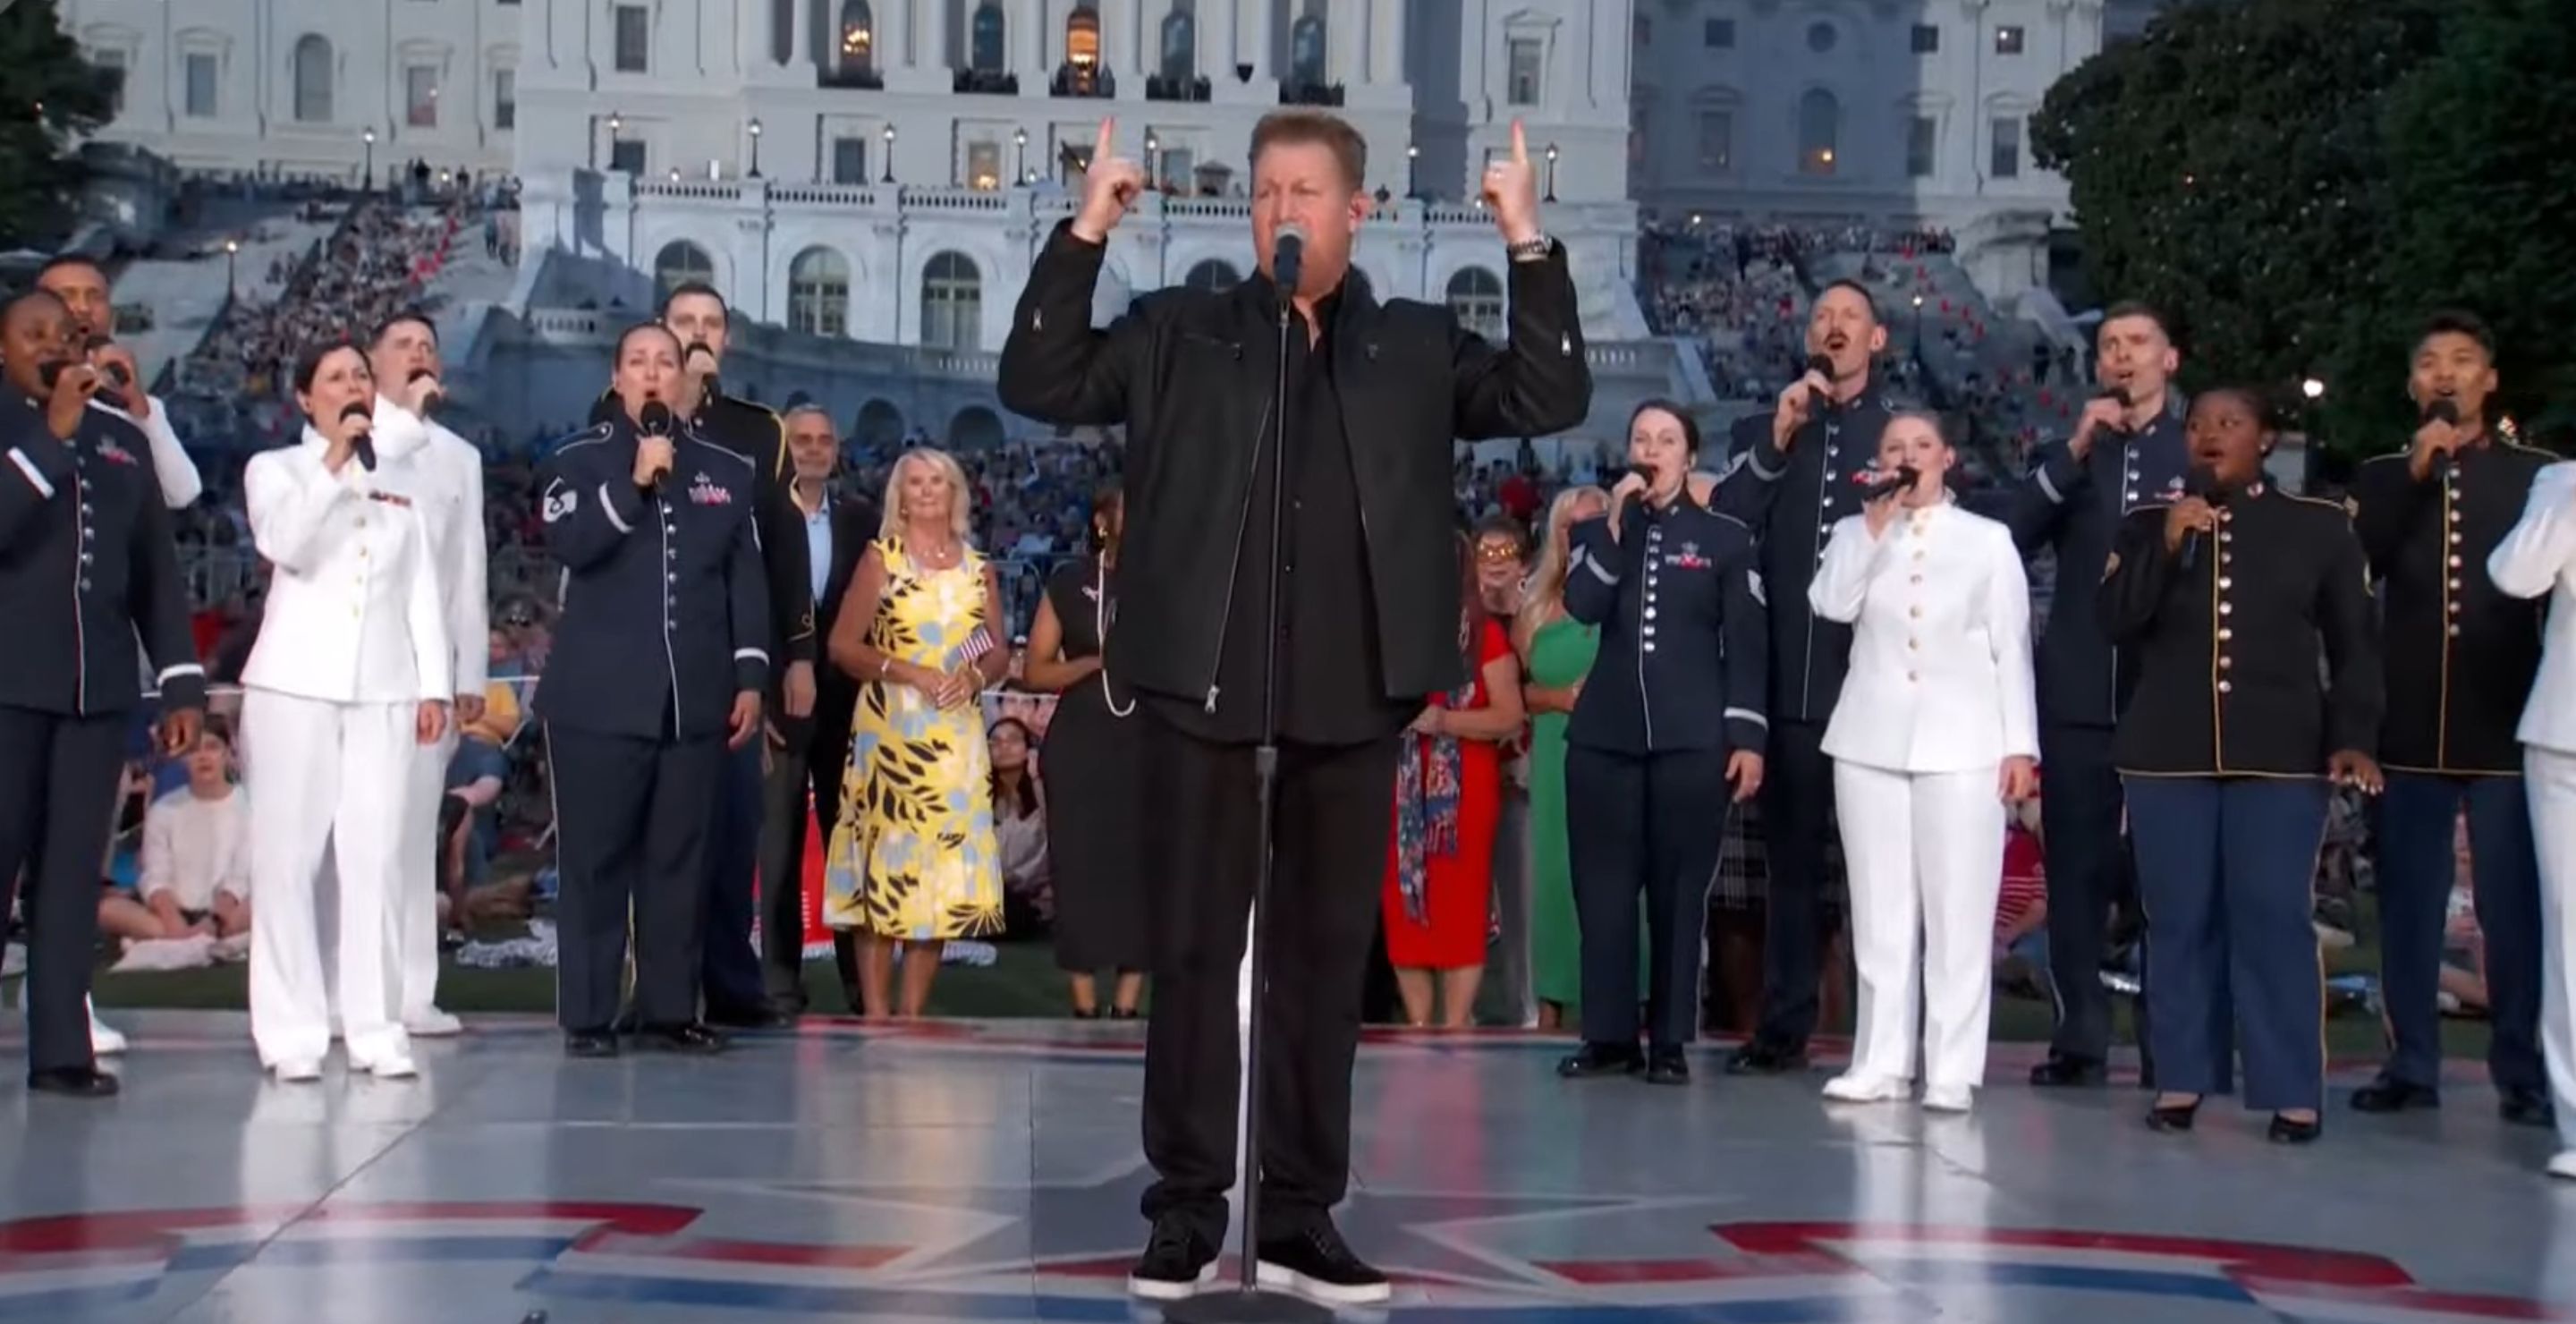 Gary LeVox Performs Haunting Rendition Of Bless The Broken Road At Memorial Day Concert